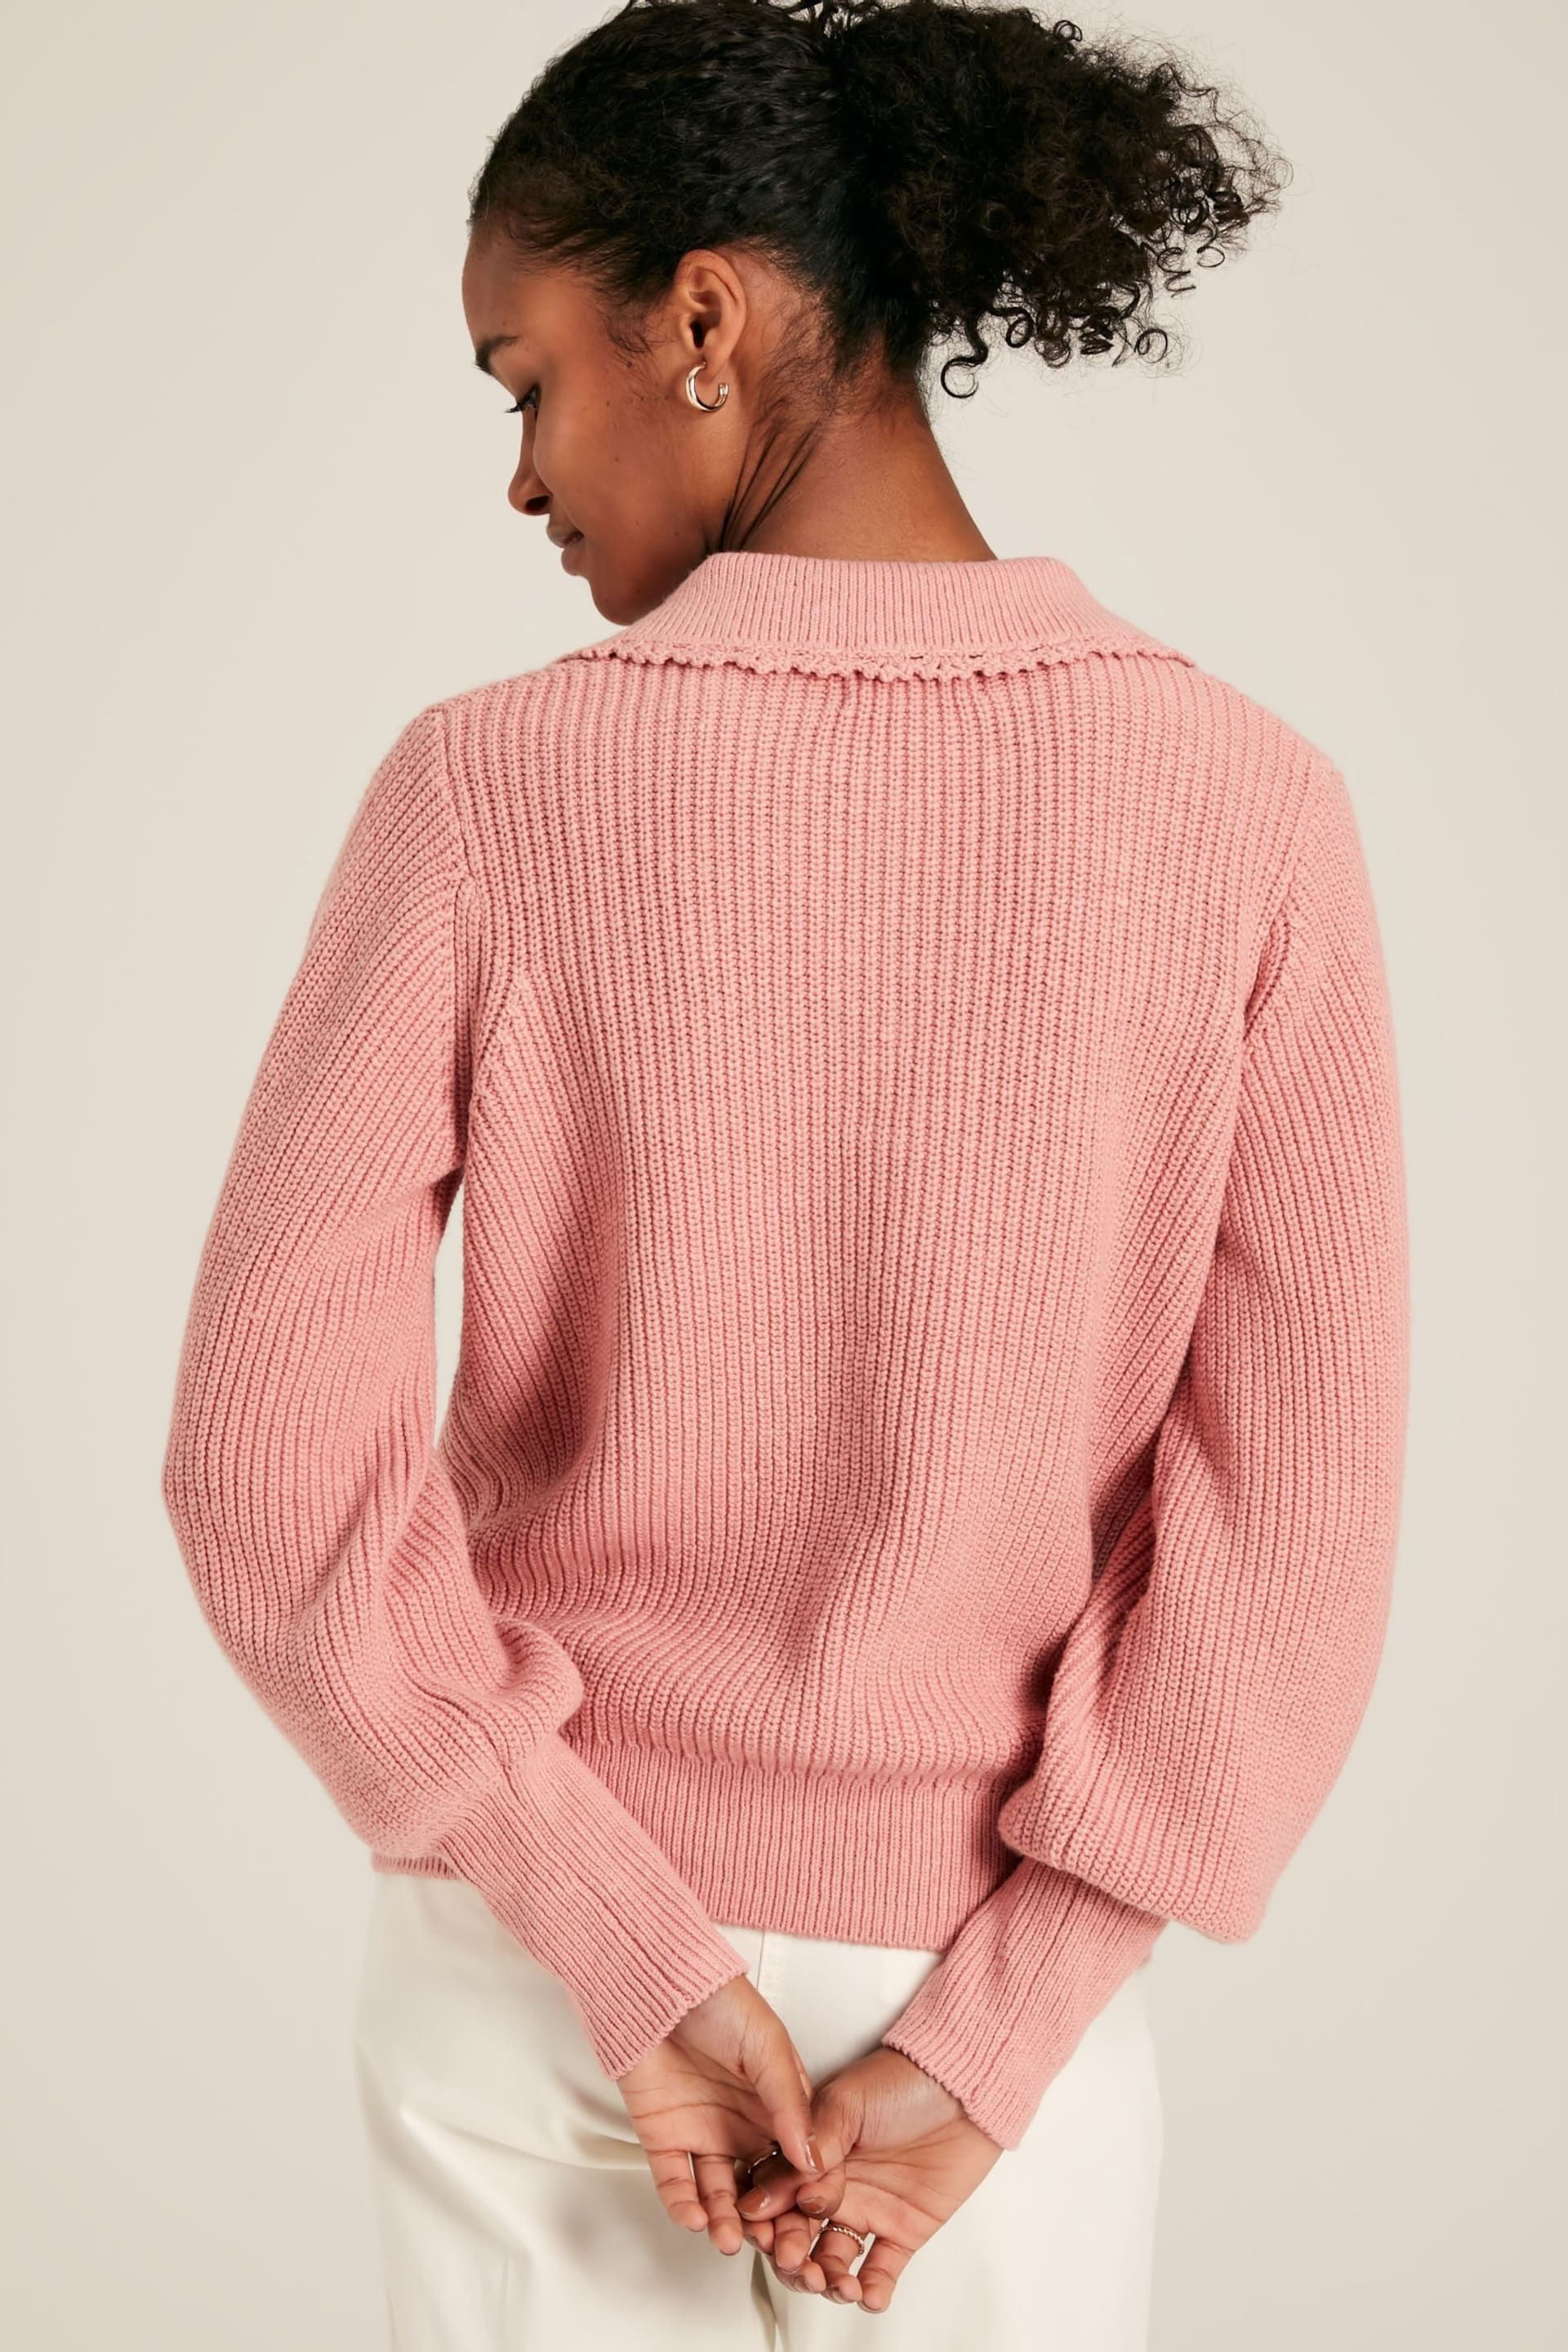 Joules Evangeline Pink Rib Knit Jumper With Crochet Collar - Image 3 of 5